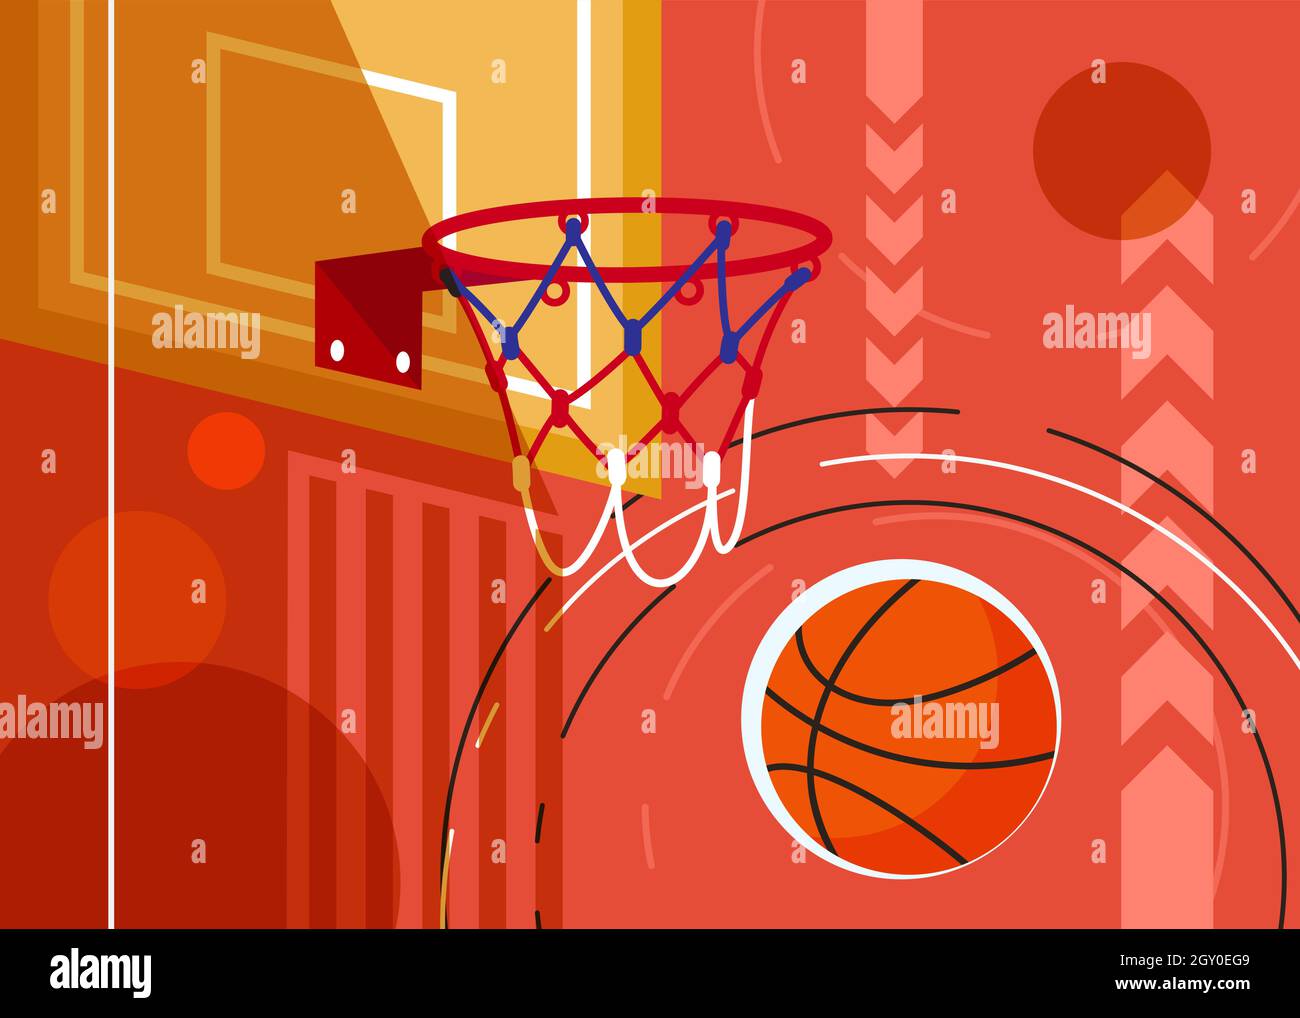 Basketball banner with backboard and ball. Sport placard design in flat style. Stock Vector